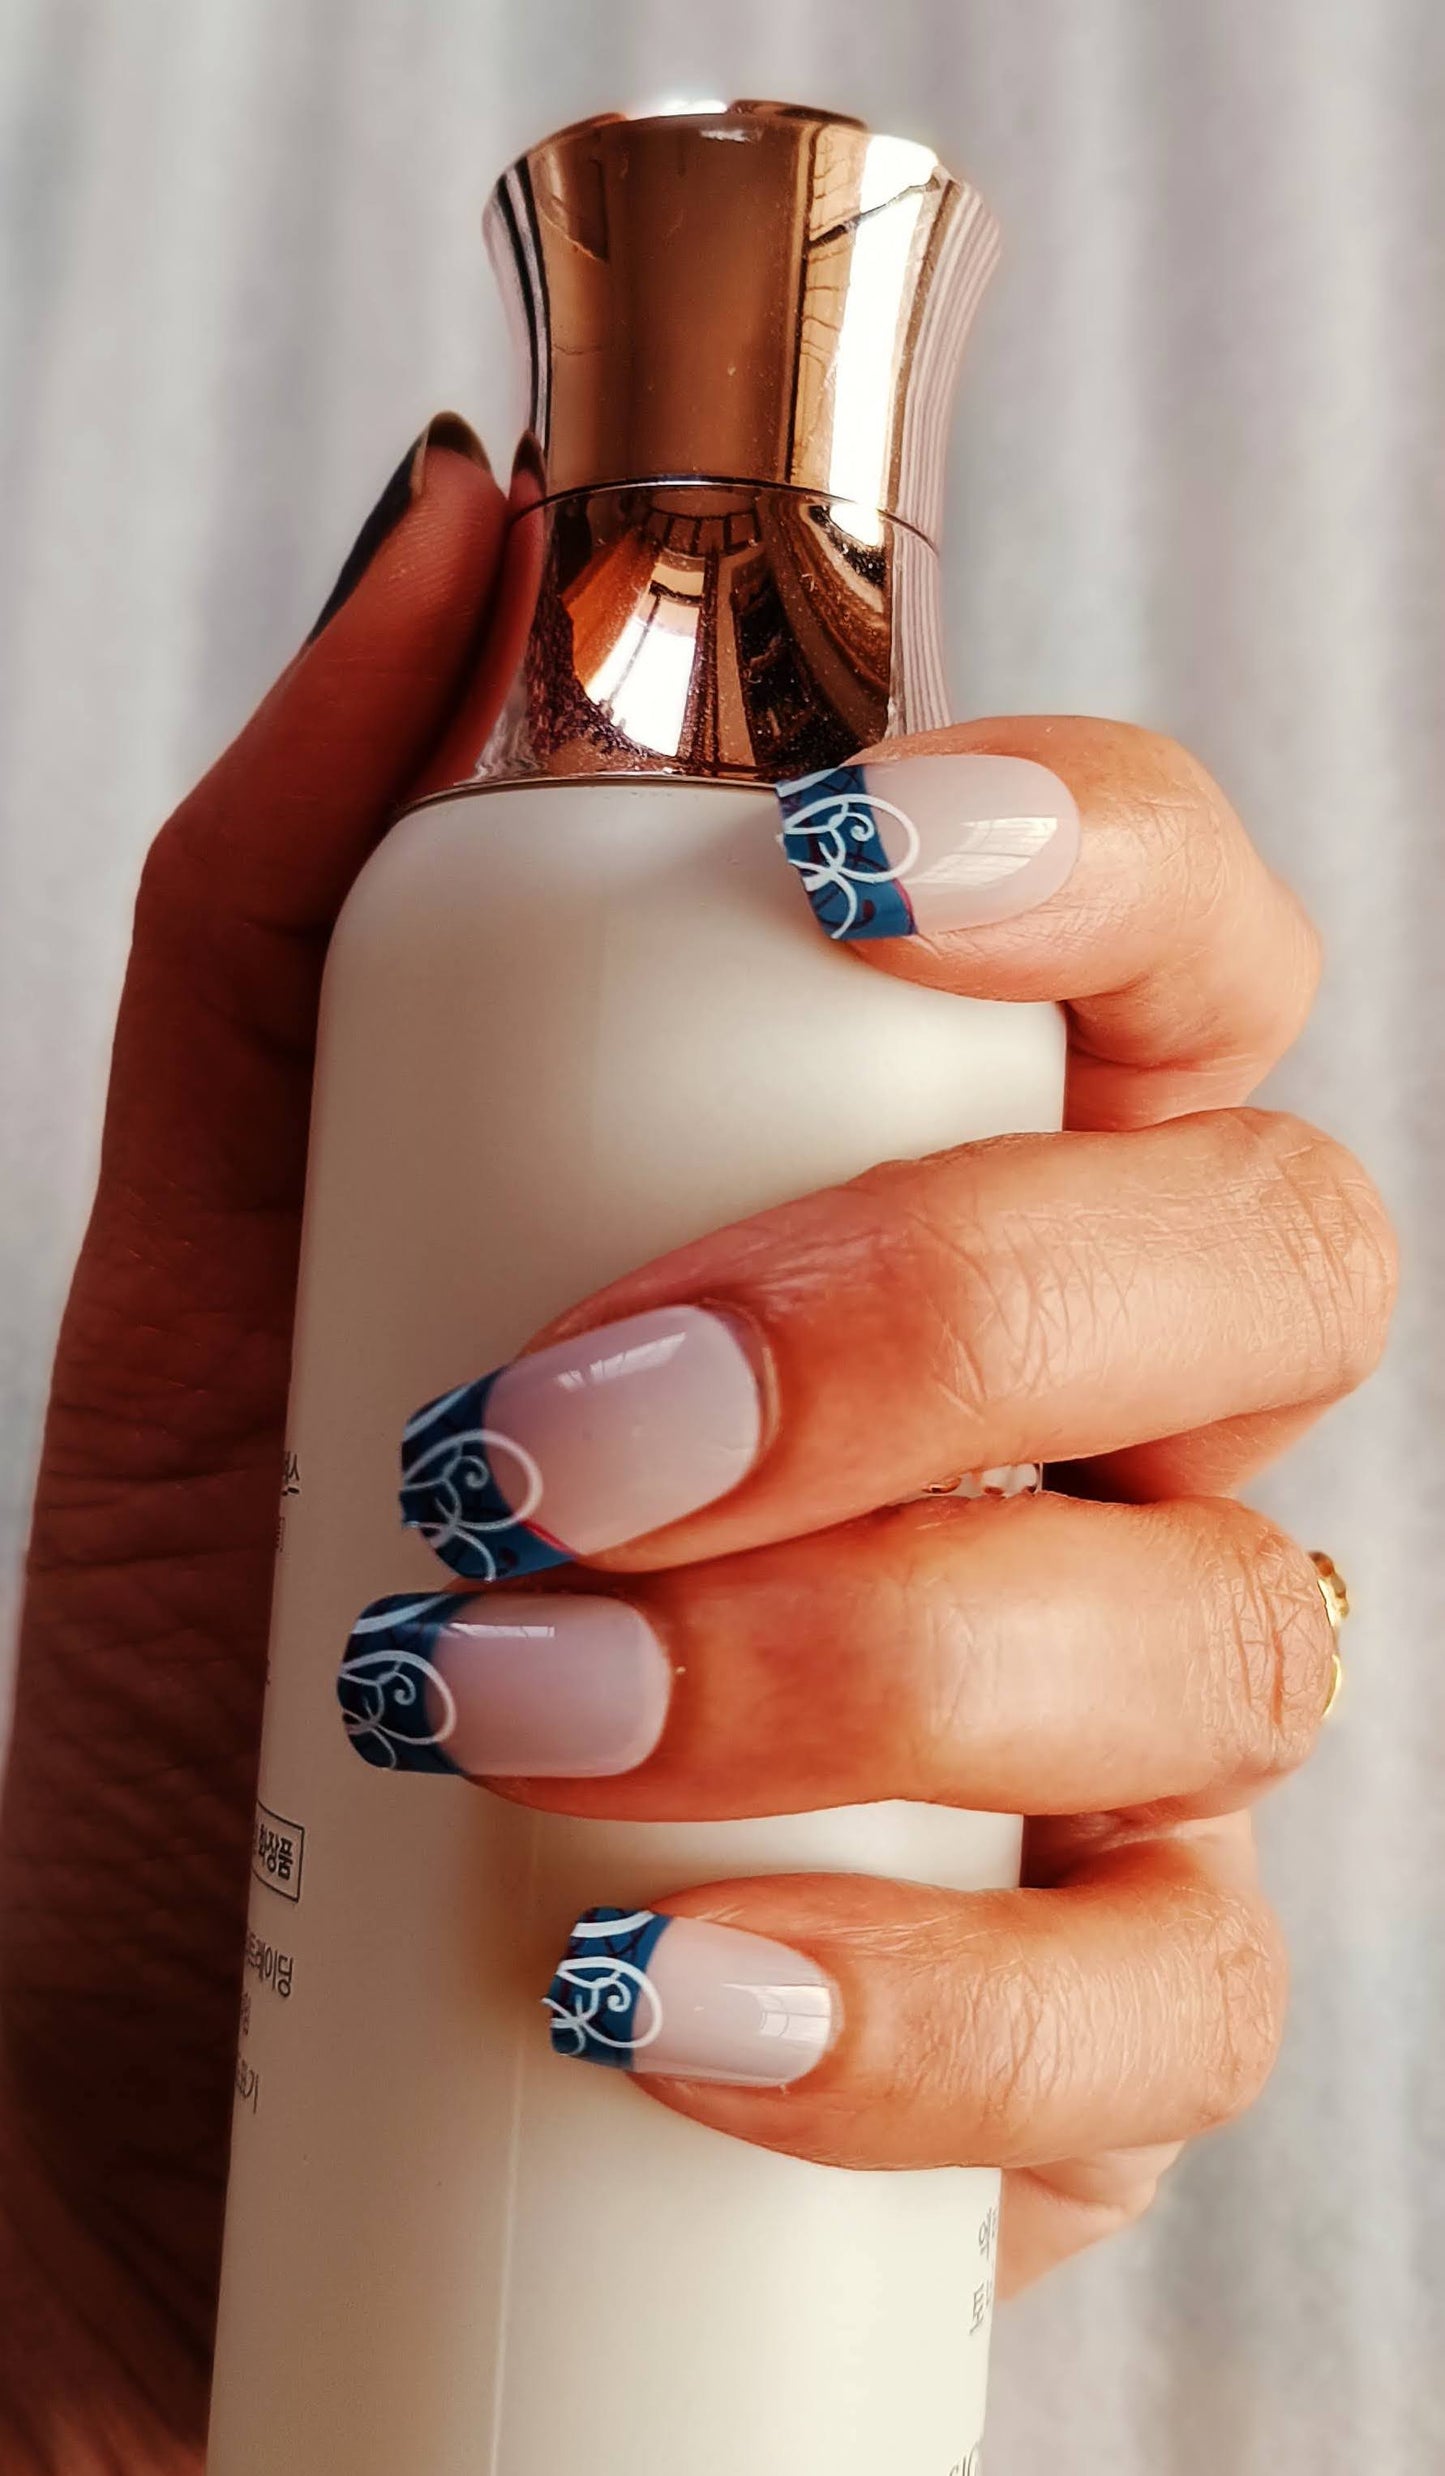 Acrylic/ Press-on Designer Nails with Glue Tabs | Artificial Nails Under 50  - Box Shaped Blue Designer French Tips